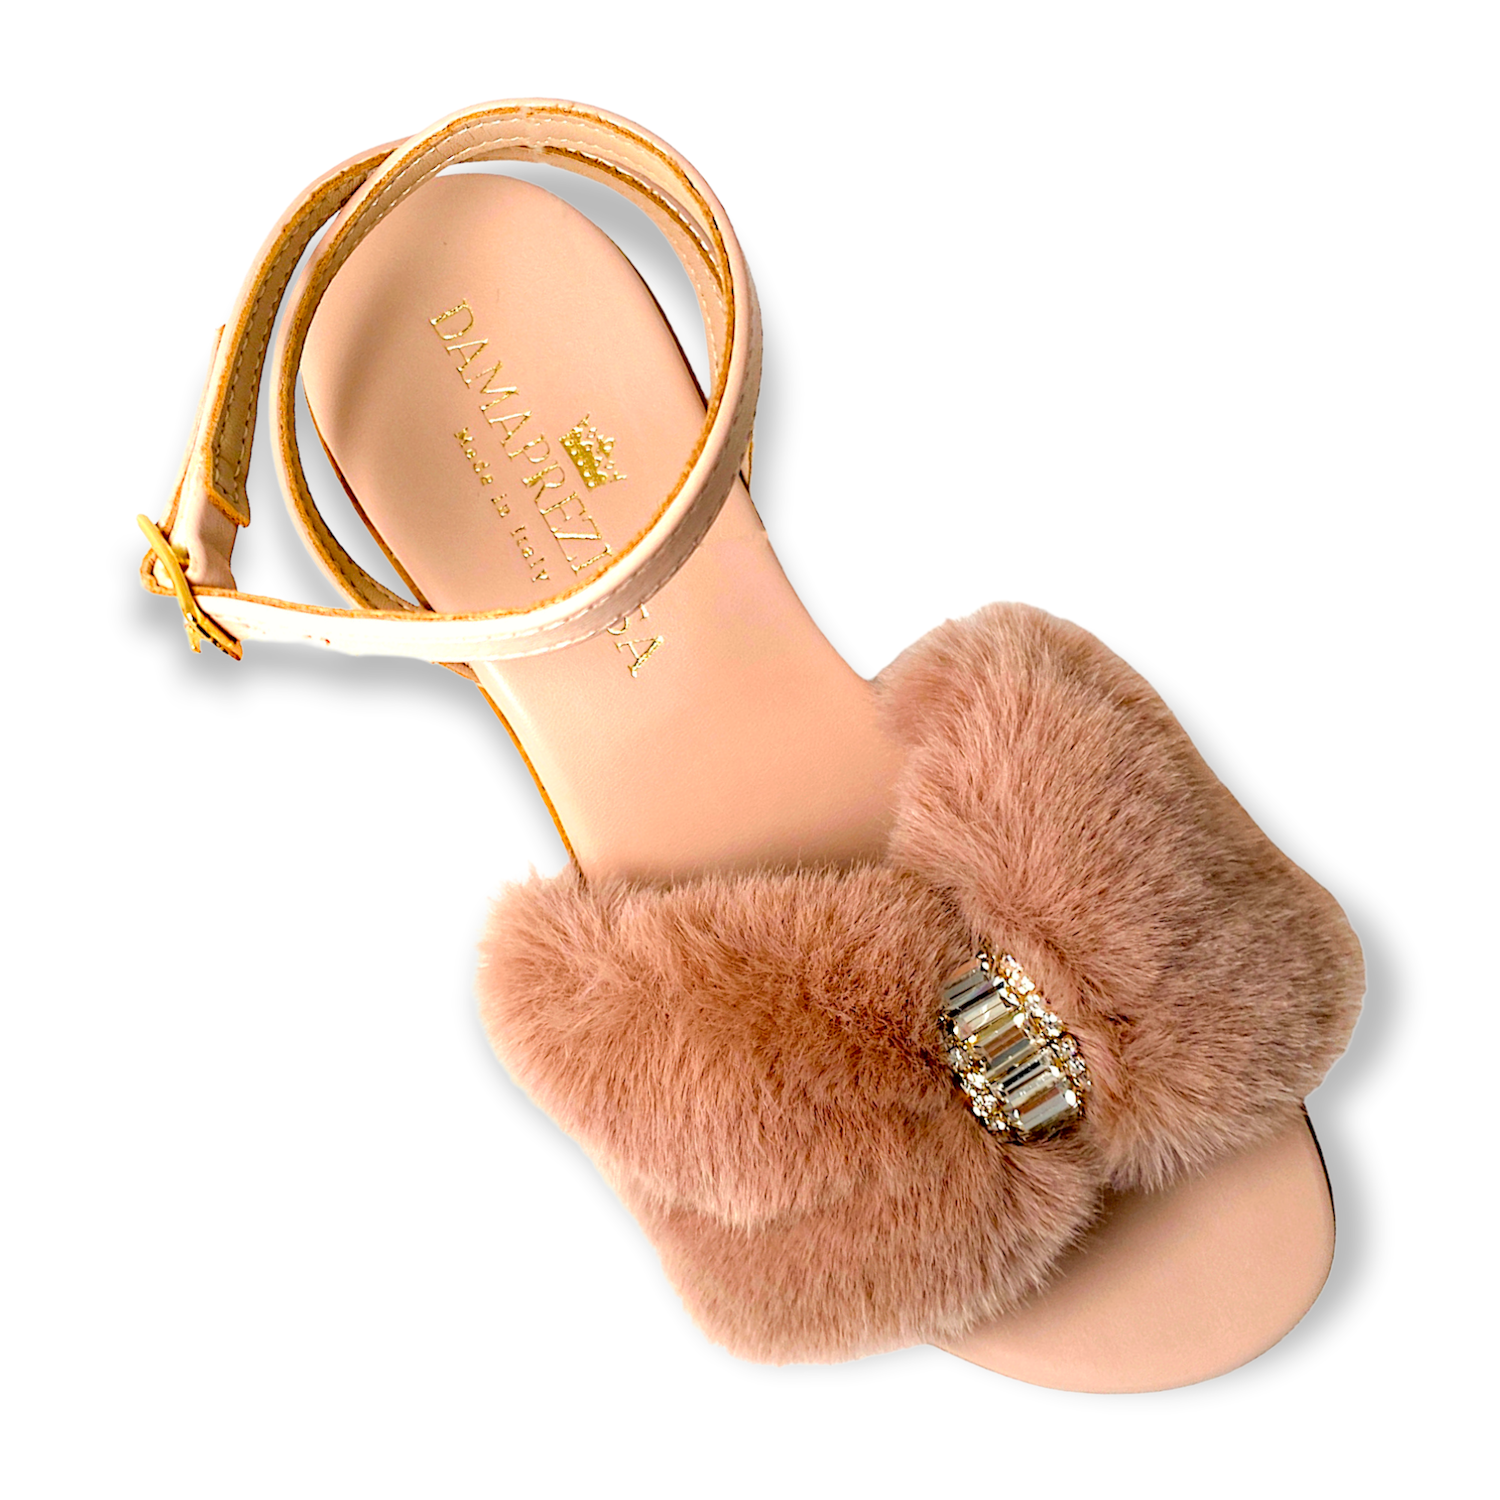 Camilla sandal in nude pink faux fur with crystals